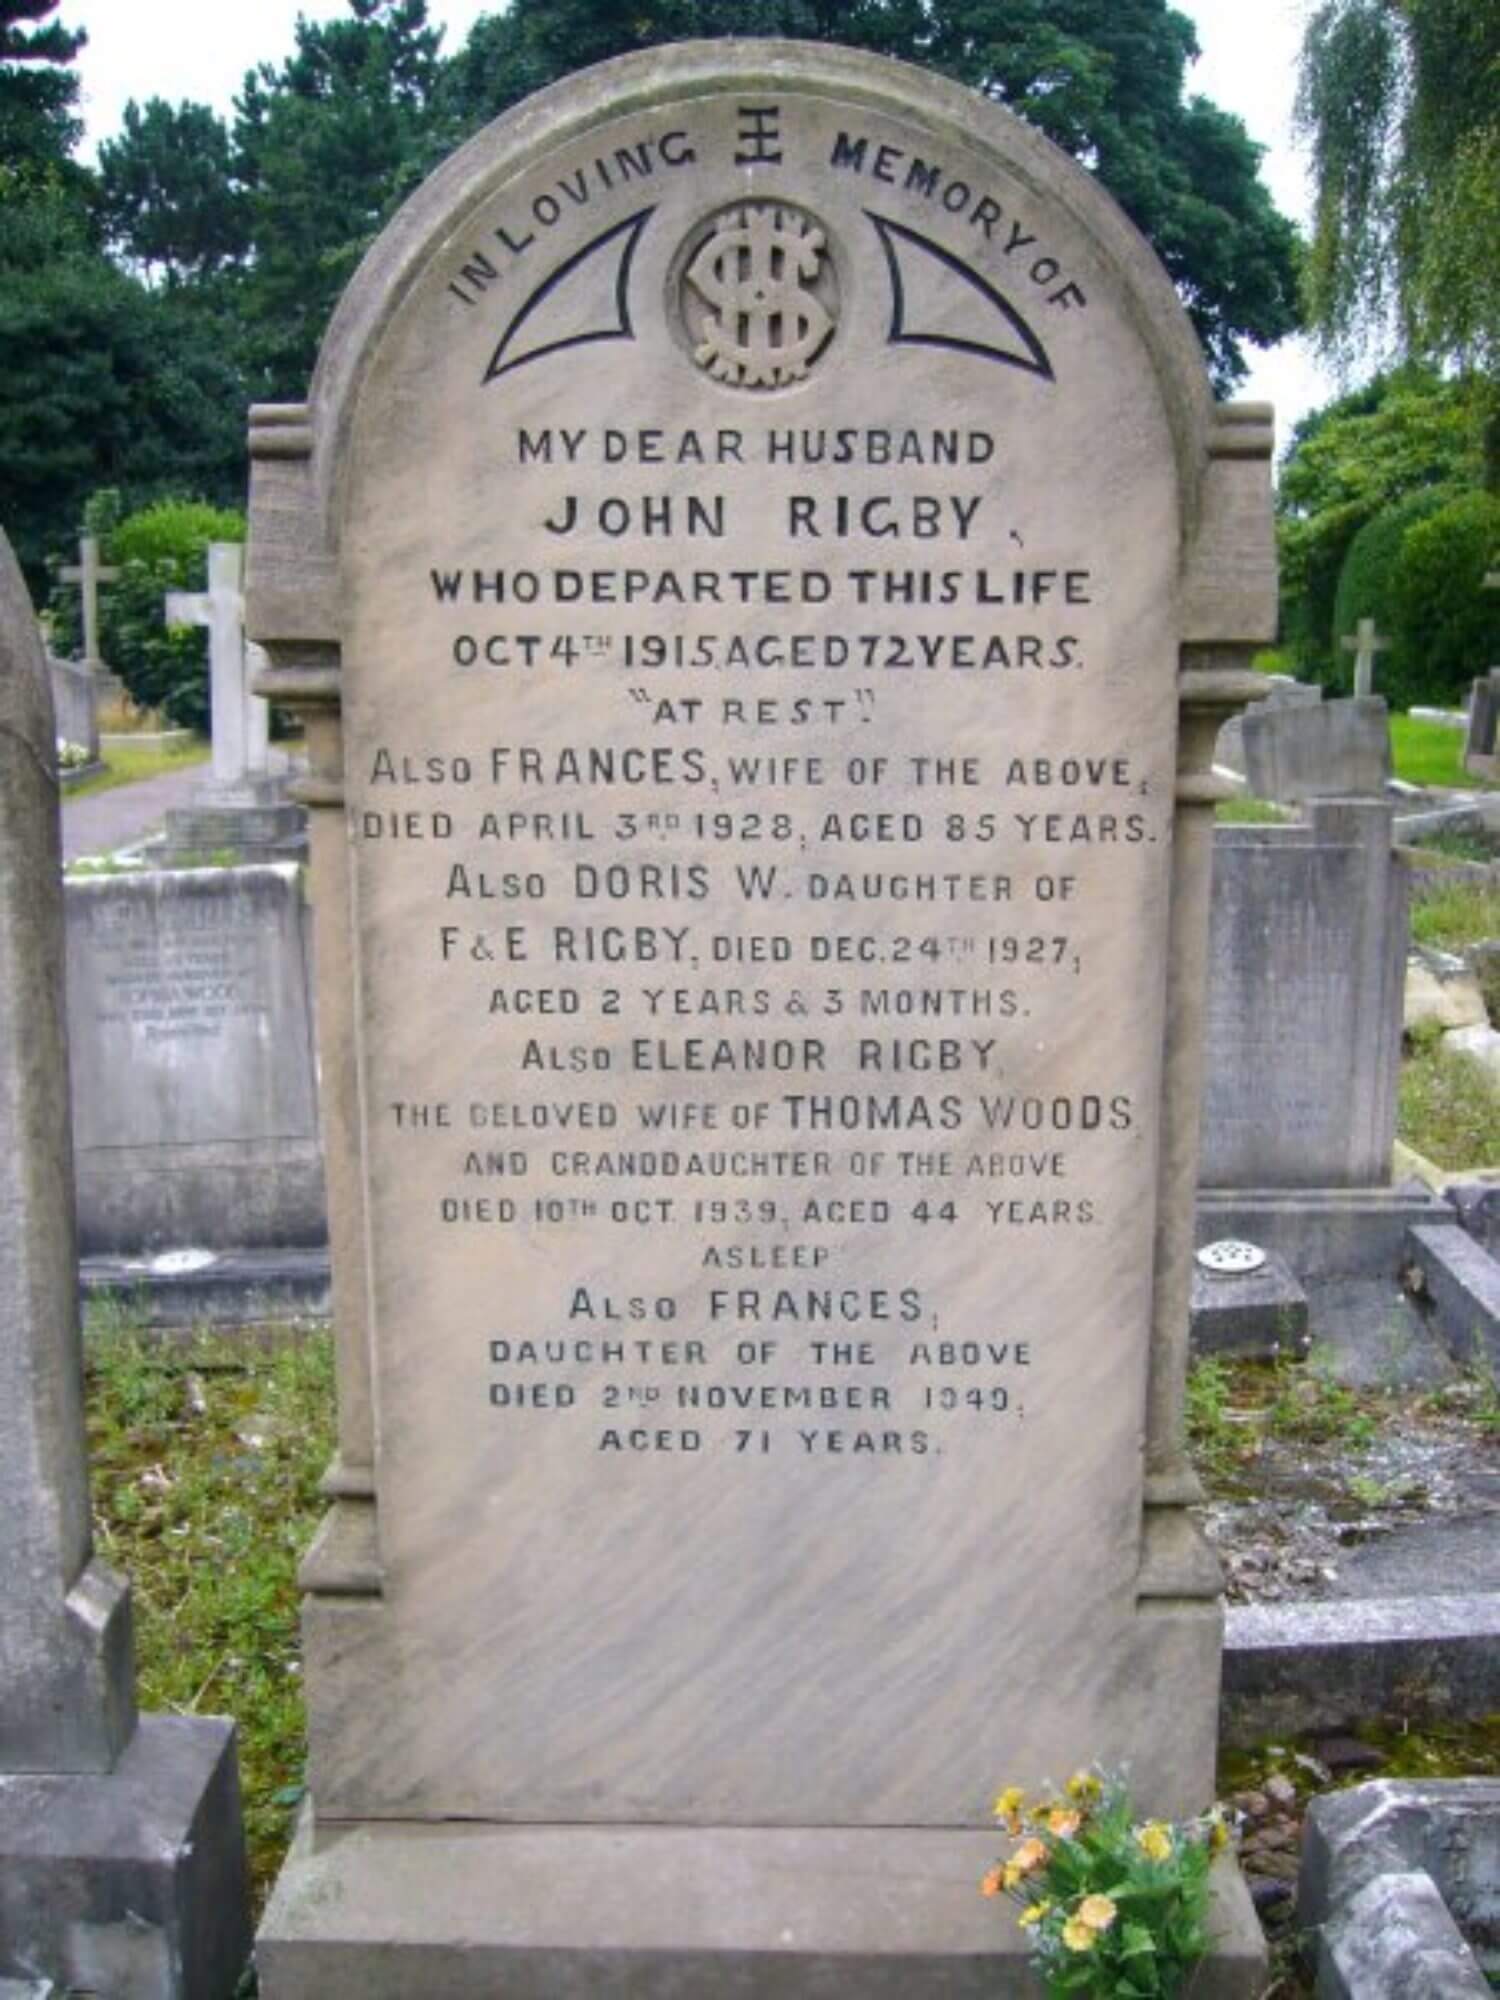 Eleanor Rigby's grave - Photo Wikimedia Commons by Crestville